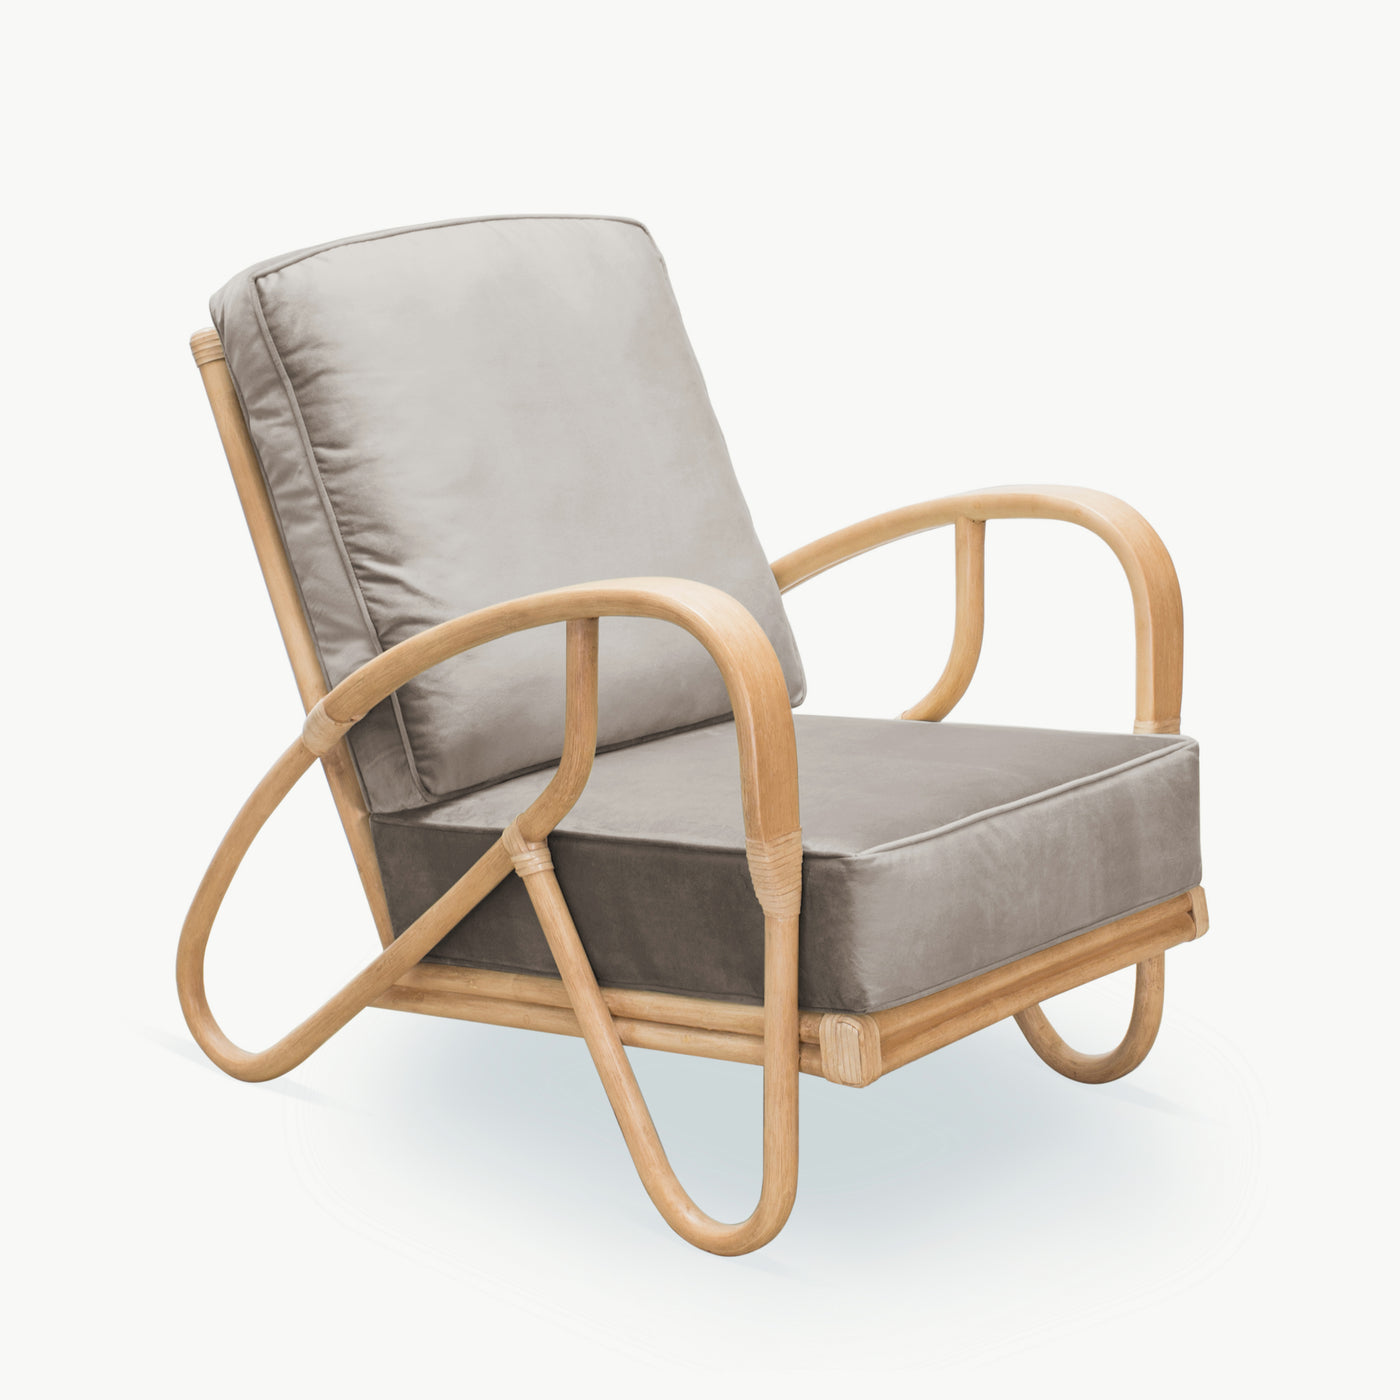 THE MAVERICK Cane Chair - Taupe